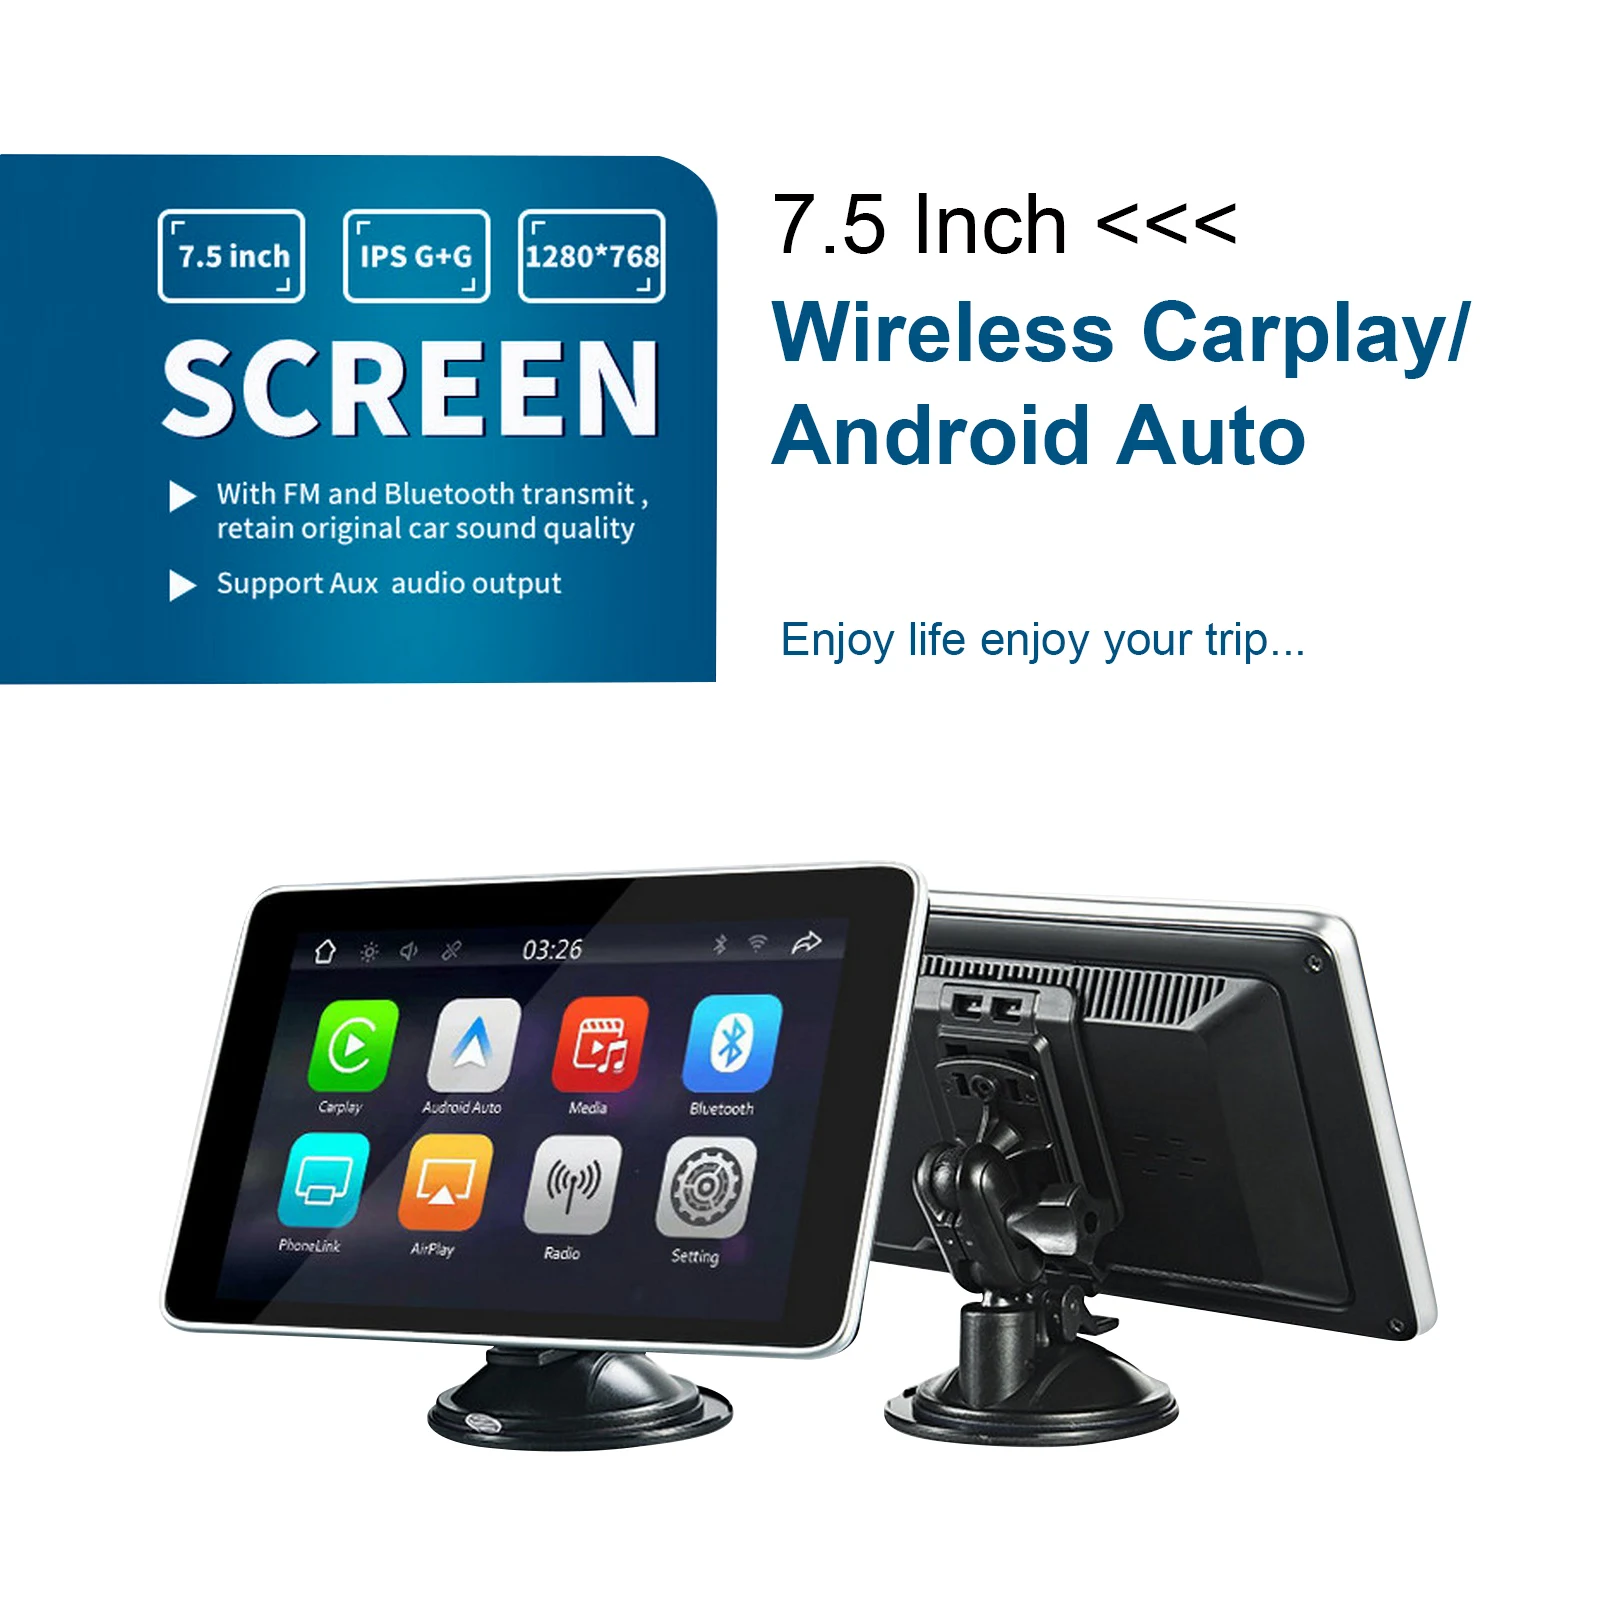 

7.5 Inch Touch Screen Car Portable Wireless Carplay Support Phone Link Support AirPlay etc Wireless Android Auto